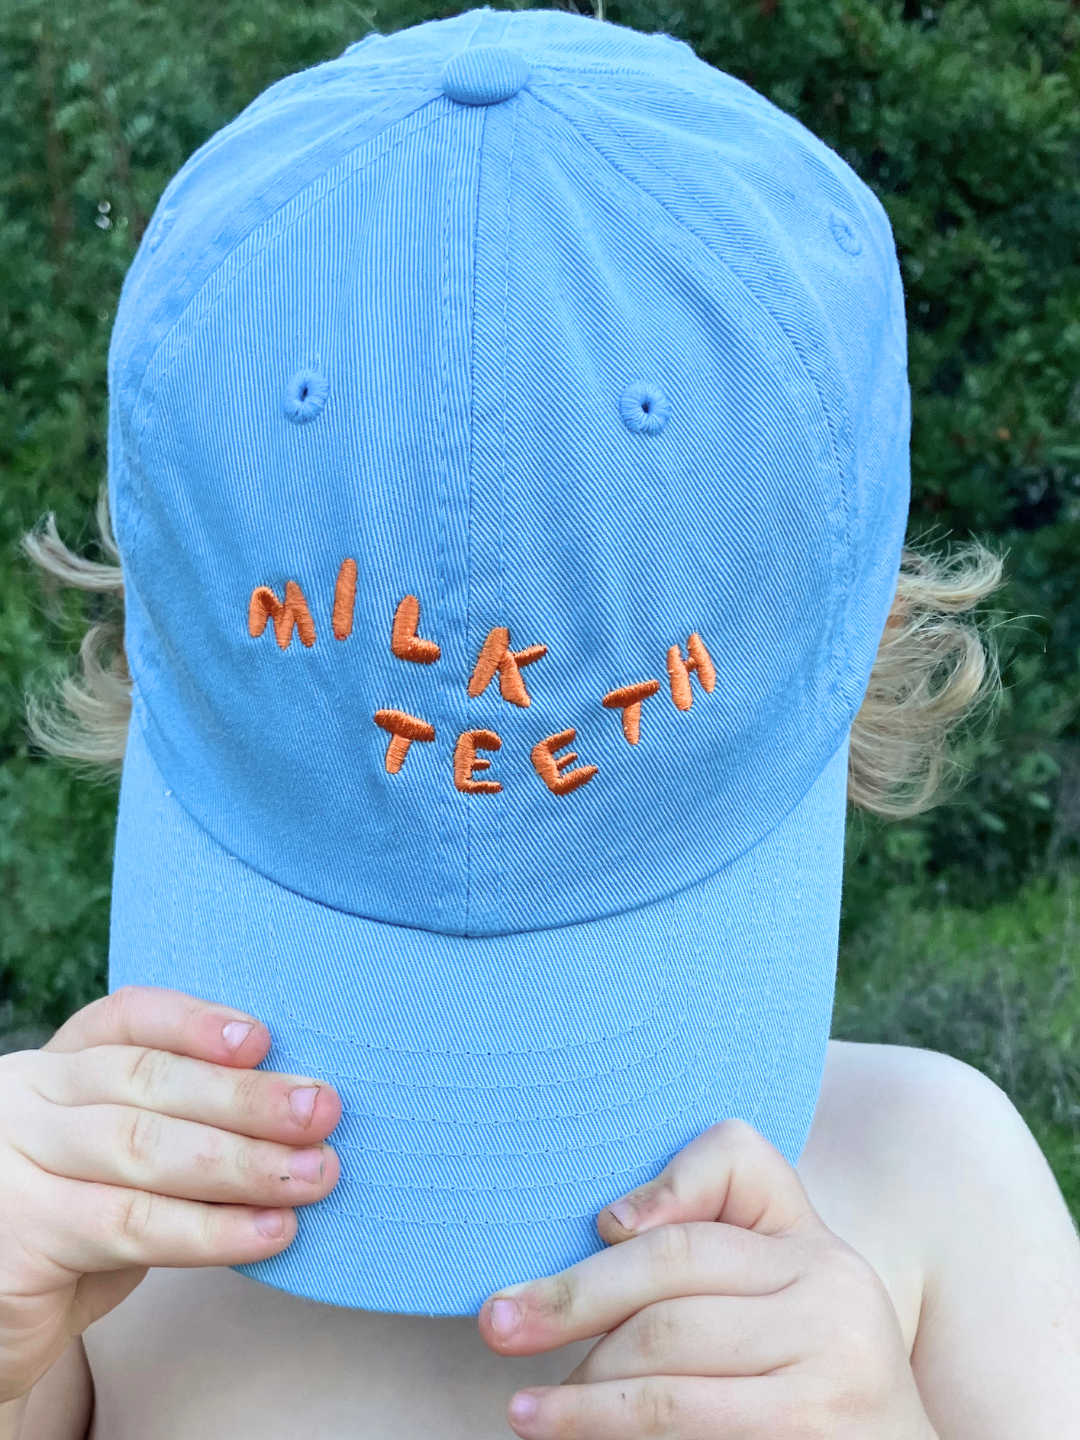 Child wearing the Milk Teeth embroidery caps in blue wit orange lettering, pulling the hat over their face